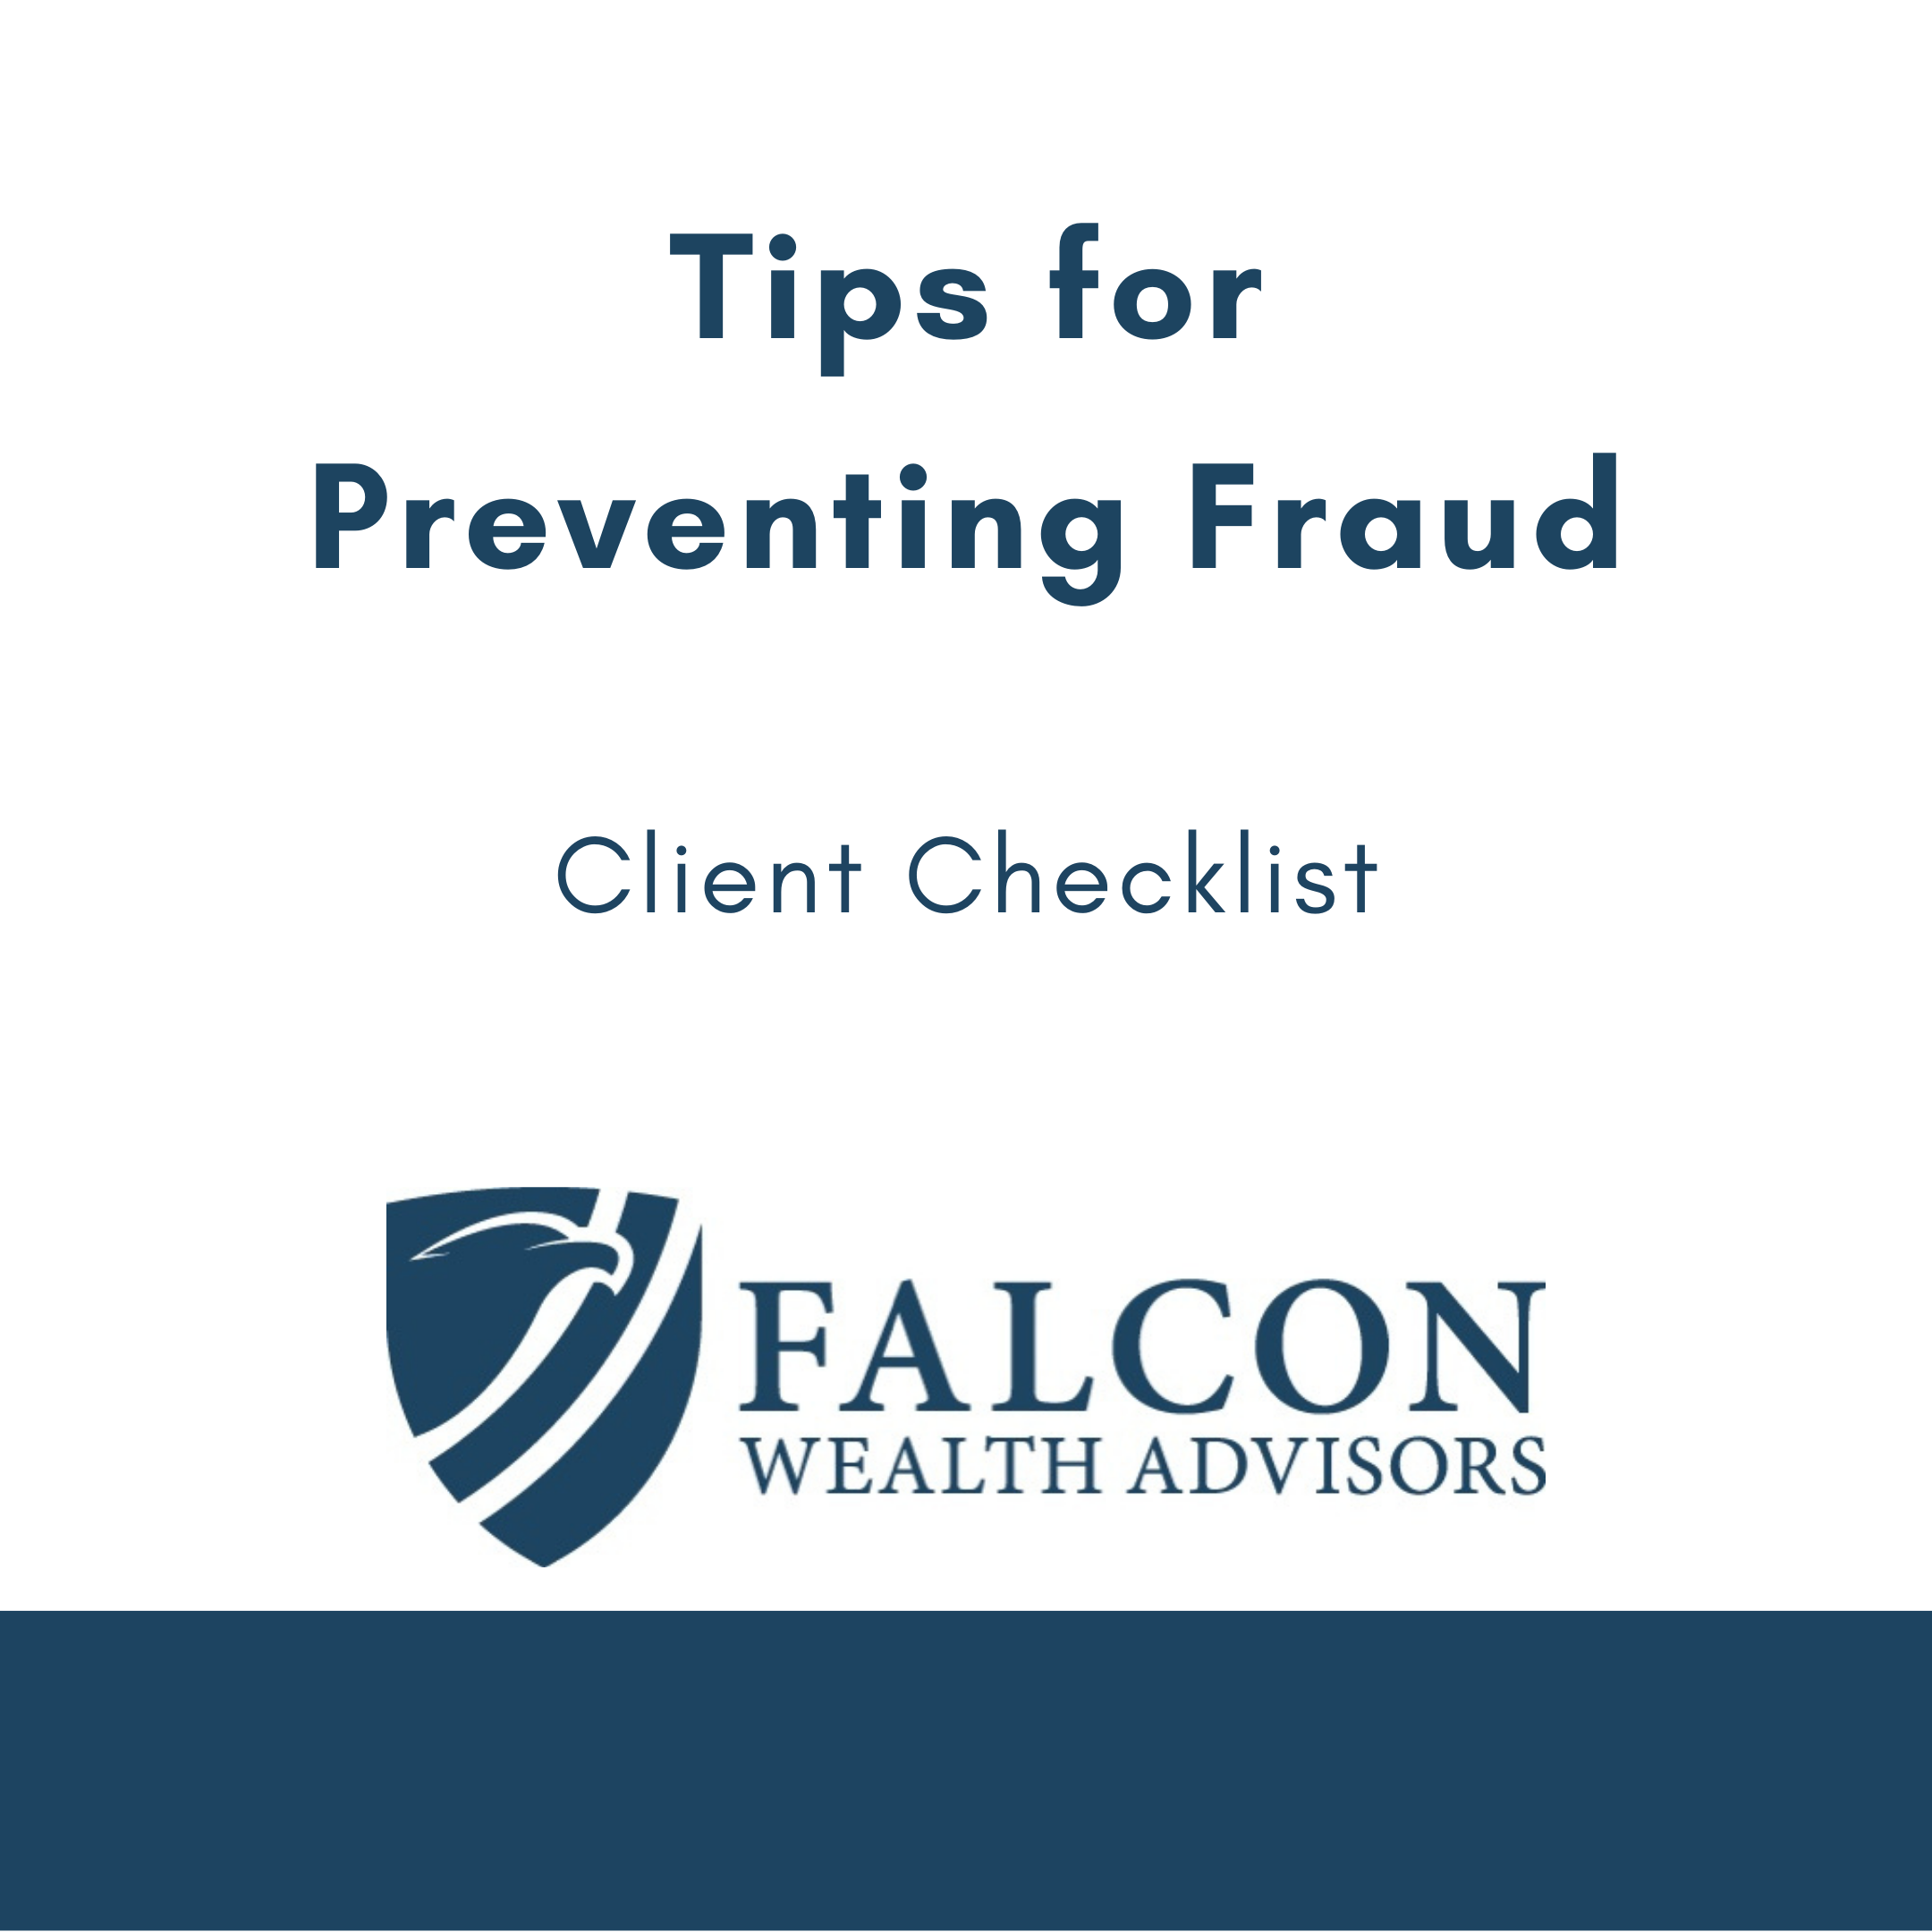 Tips for Preventing Fraud: Client Checklist